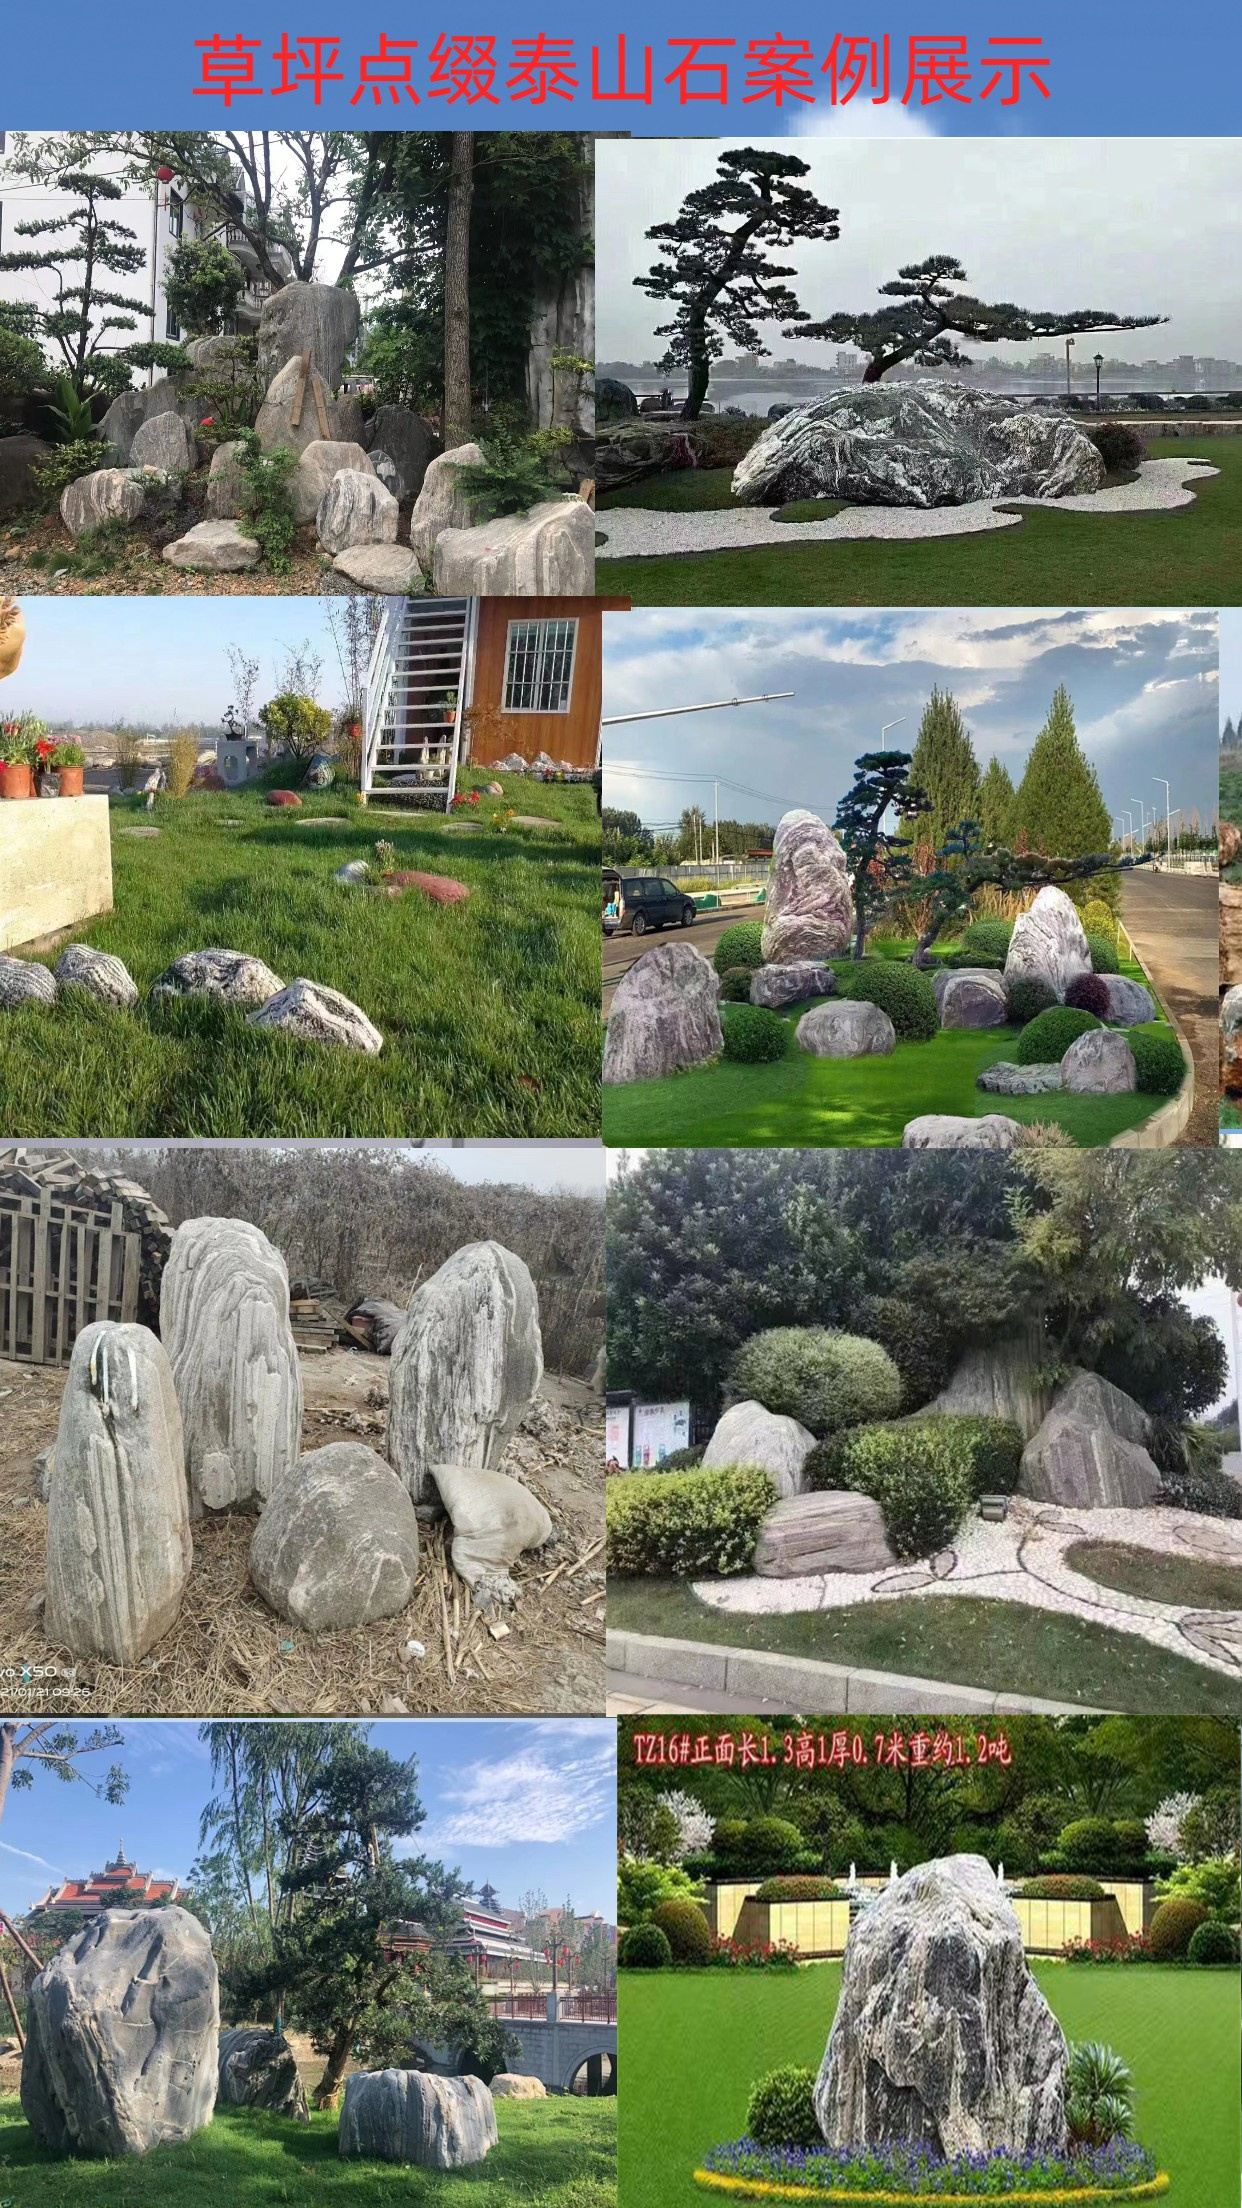 Adequate supply of natural Lingbi stone for garden landscape lawn stone, natural garden stone landscape stone